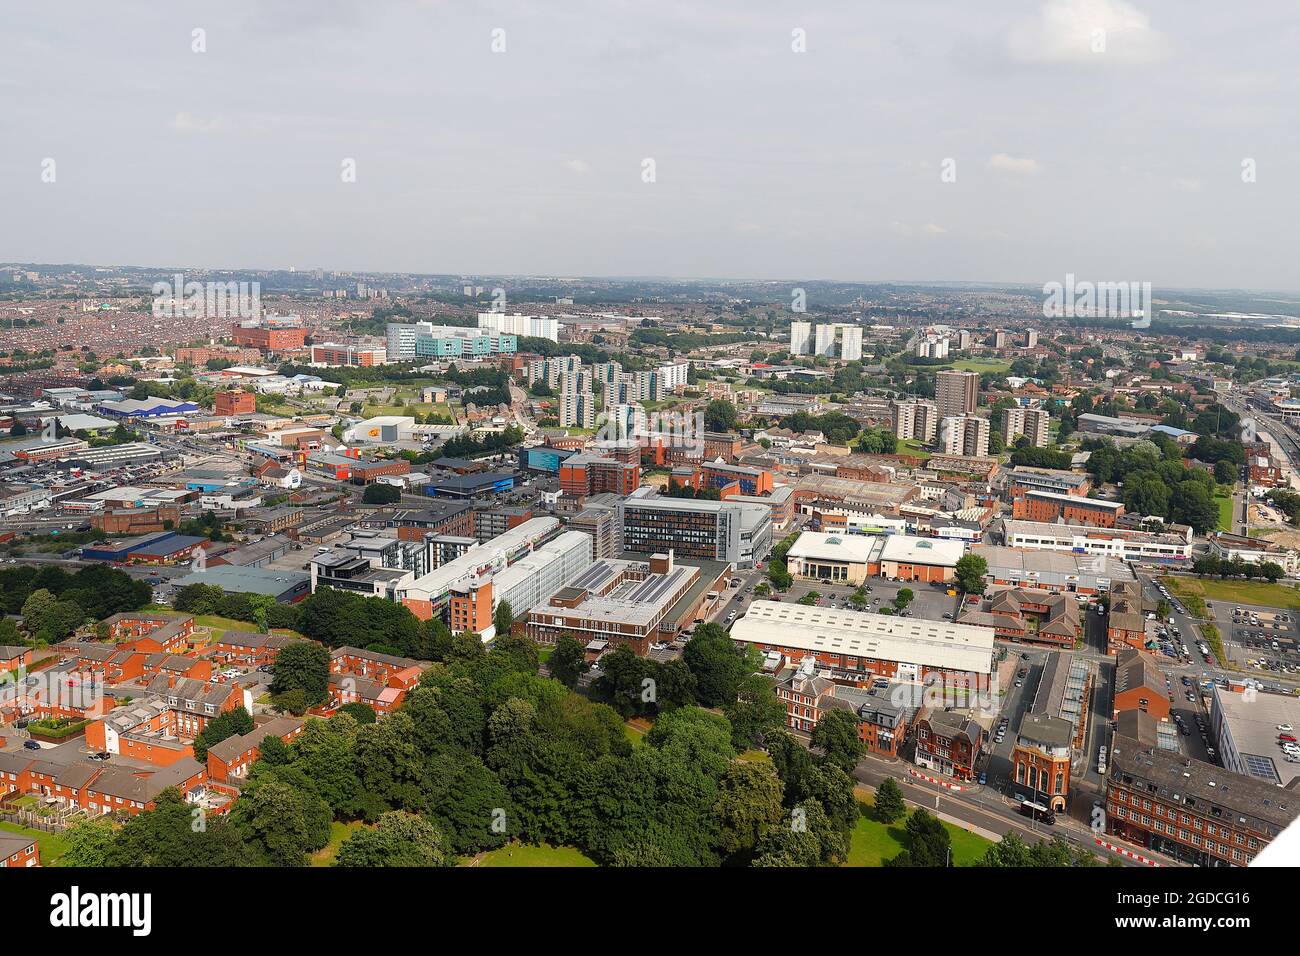 One of many views across Leeds City Centre from the top of Yorkshire's ...